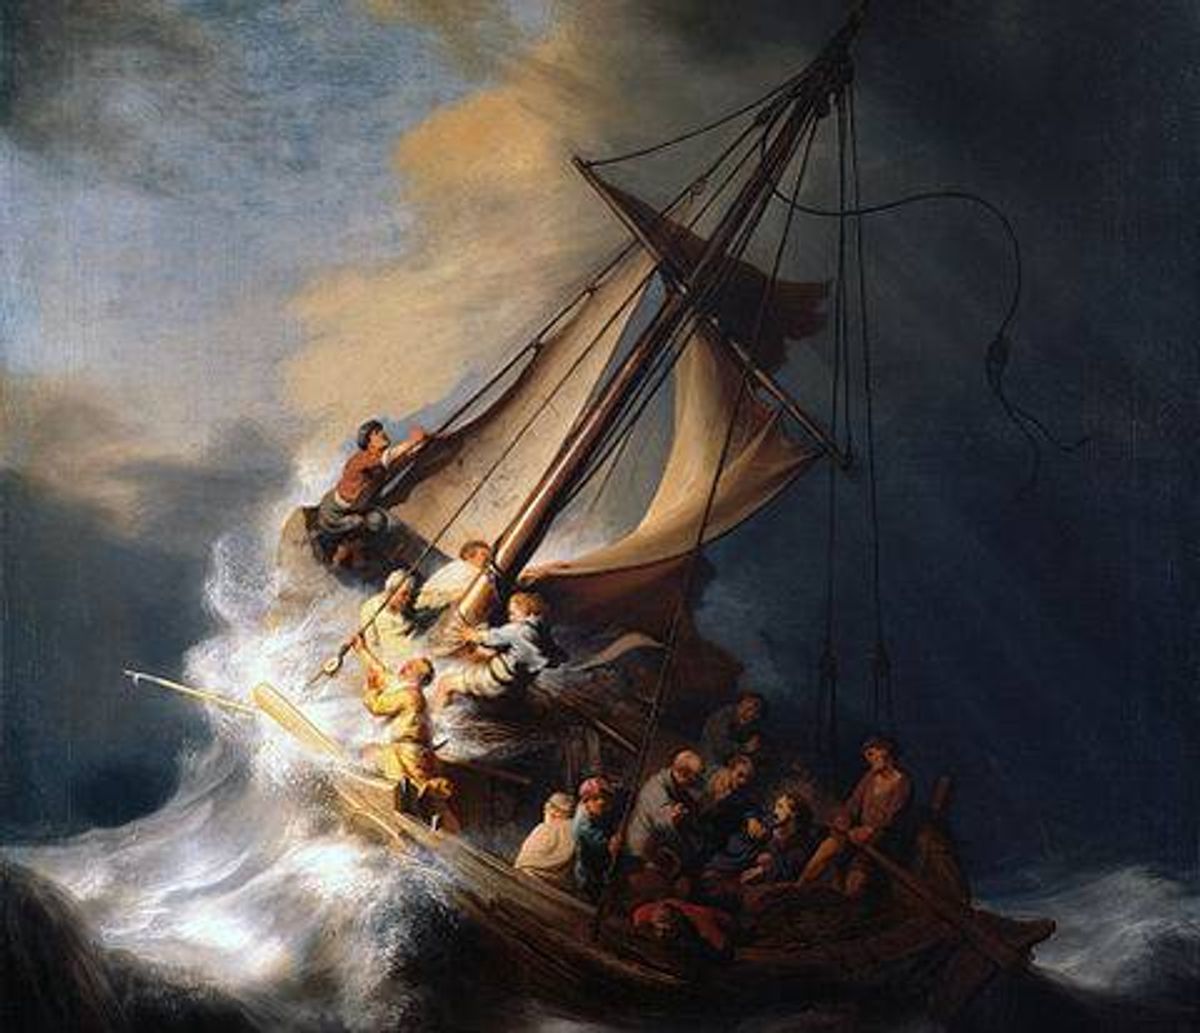 Rembrandt's "The Storm on the Sea of Galilee," one of the stolen artworks         (Wikimedia)